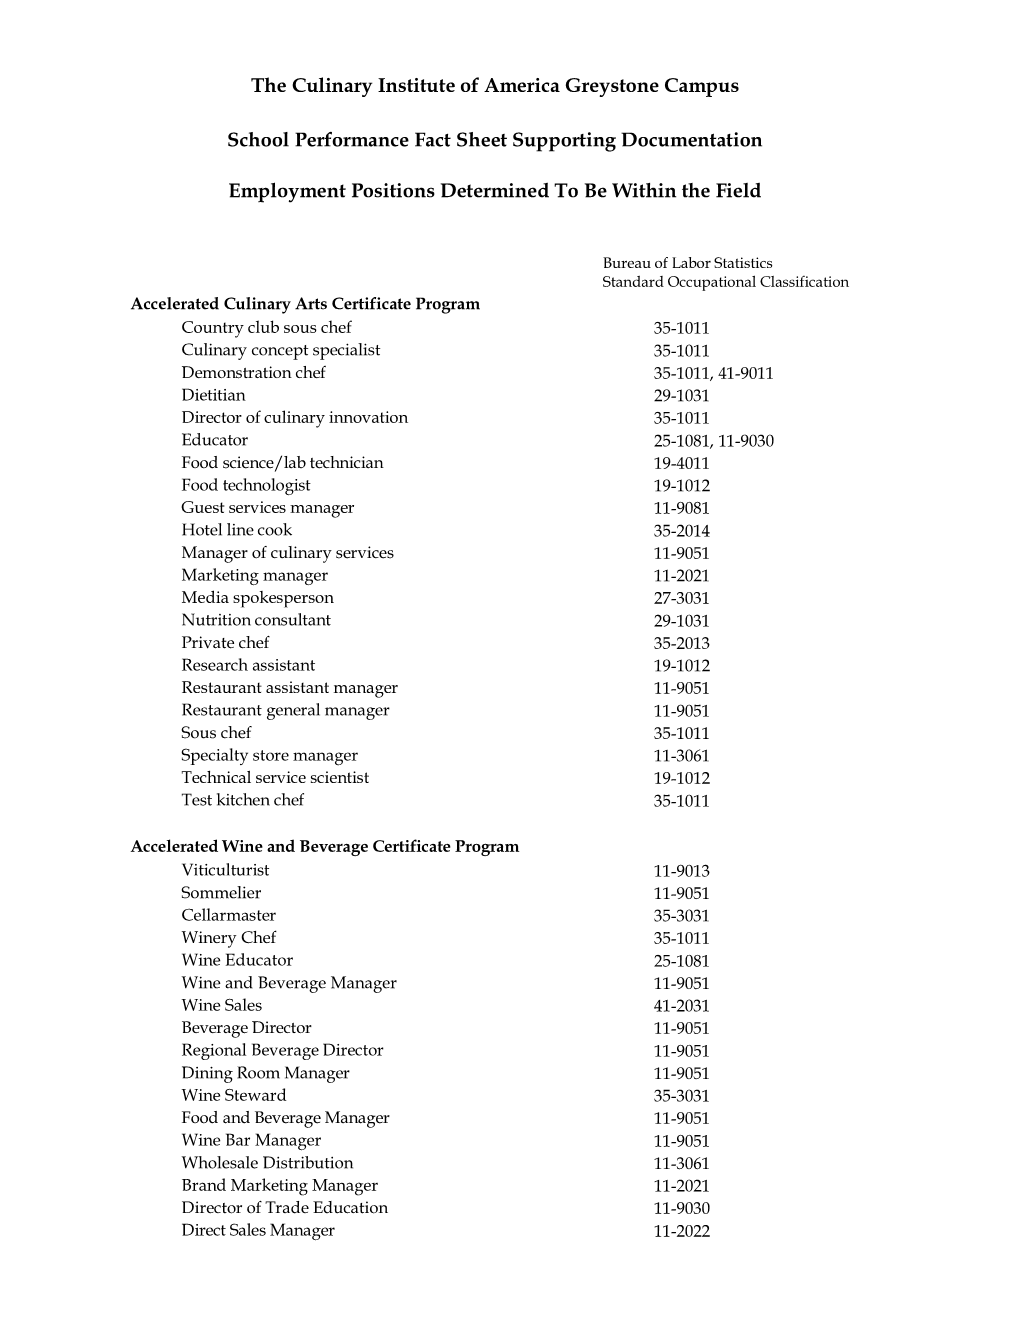 Employment Positions Within the Field